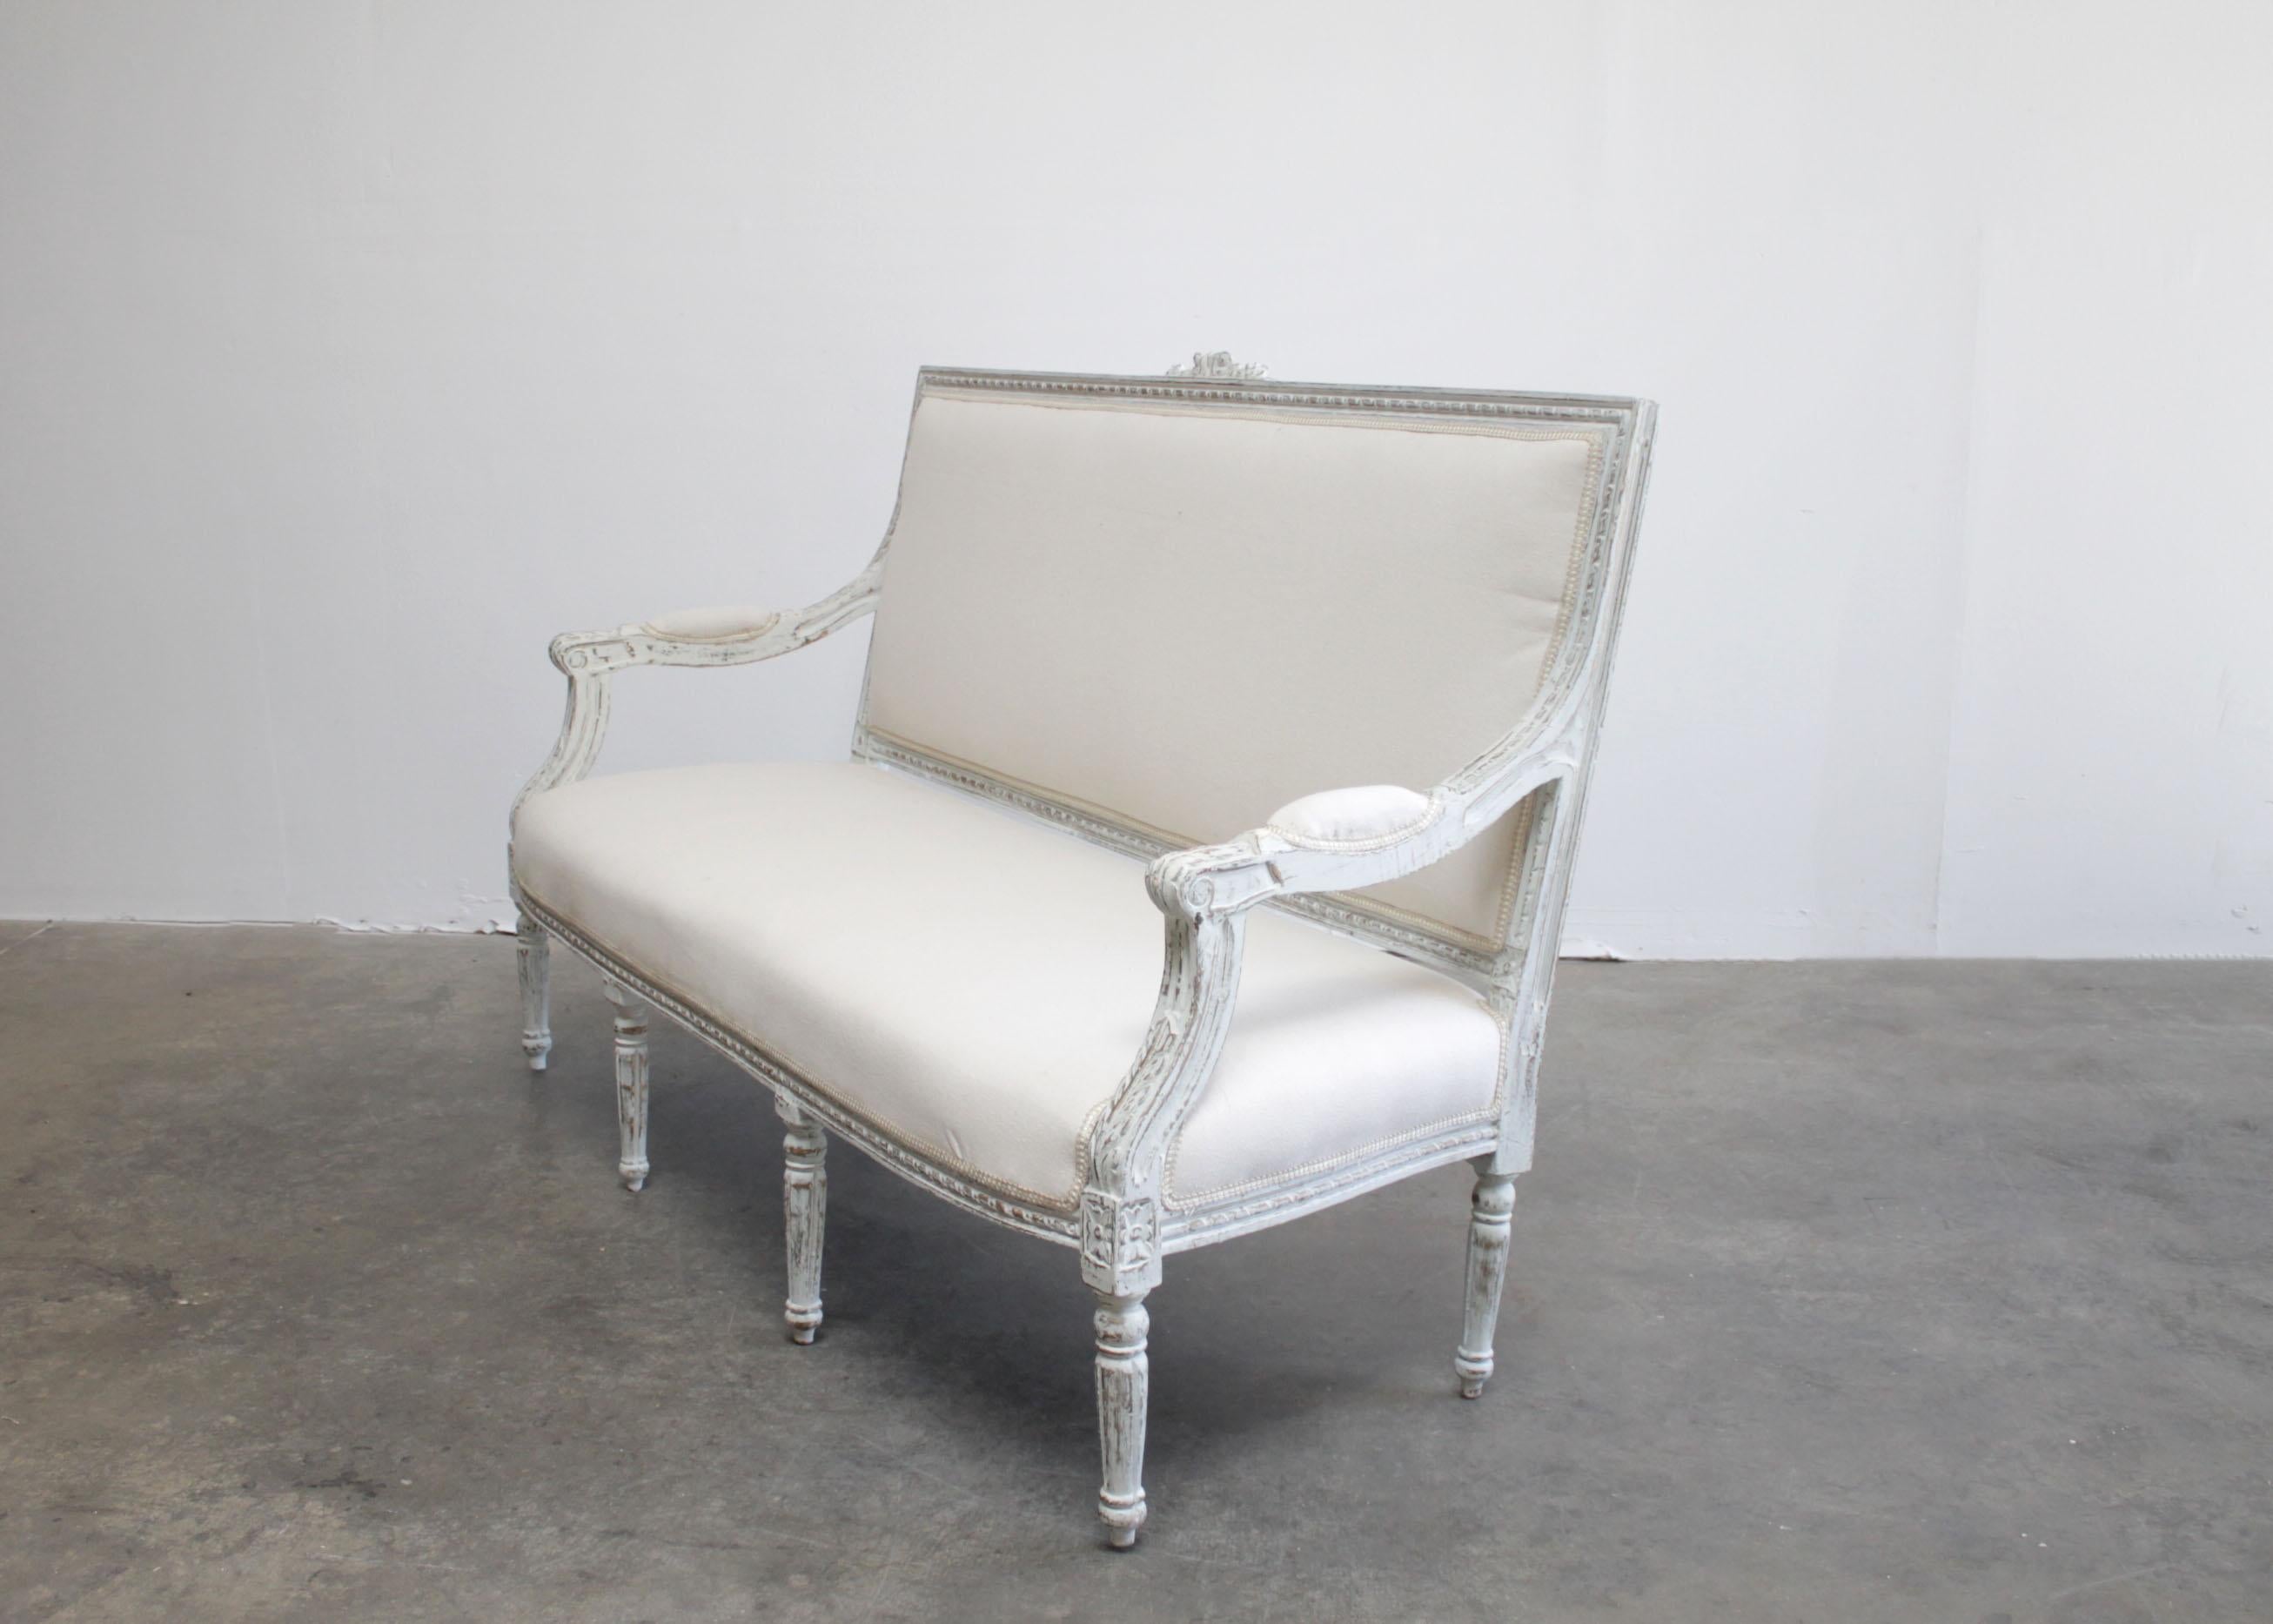 This beautiful Louis style settee is painted in a soft white with subtle oyster gray tones.
A little bit of gilt and wood color is peeking through the antique distressed finish.
Solid and sturdy ready for everyday use. Upholstered in a solid